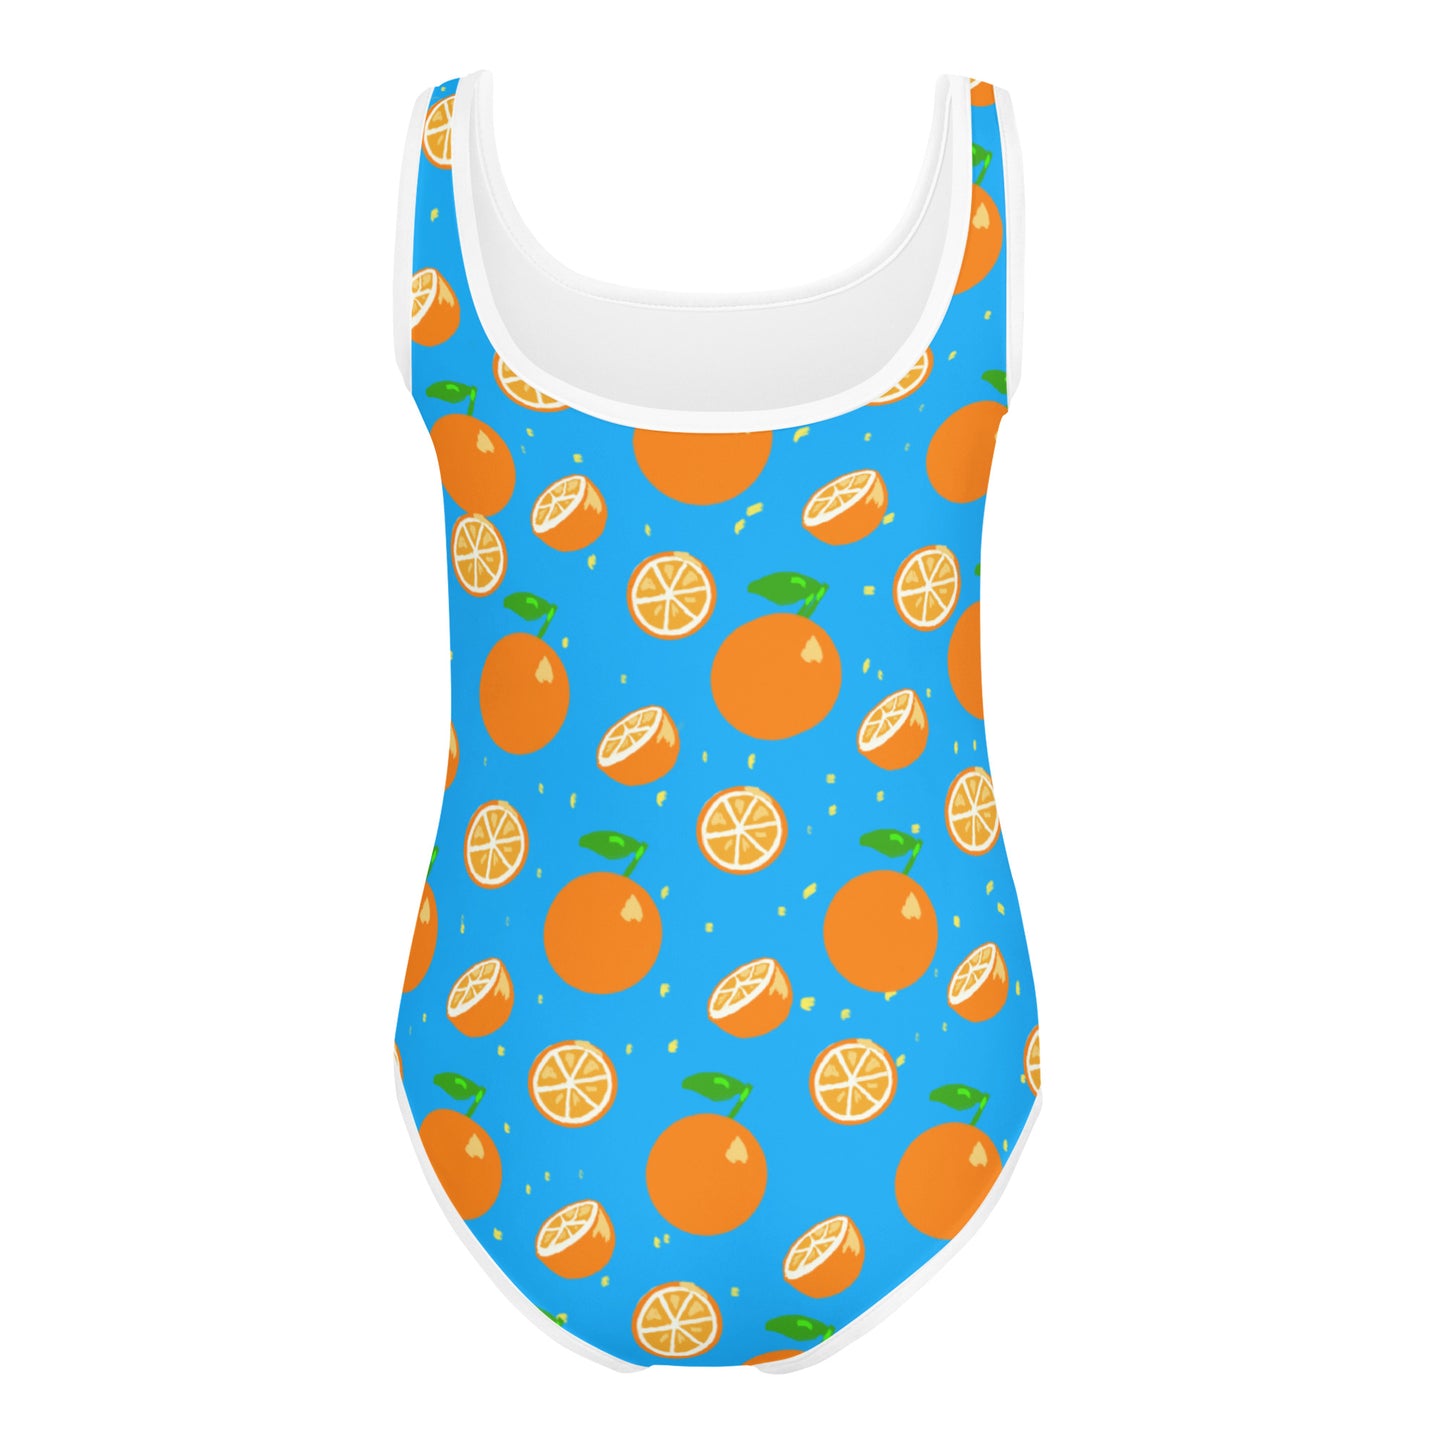 Girls' Athletic Swimsuit One Piece Blue with Oranges (Size 2T-7) FREE SHIPPING